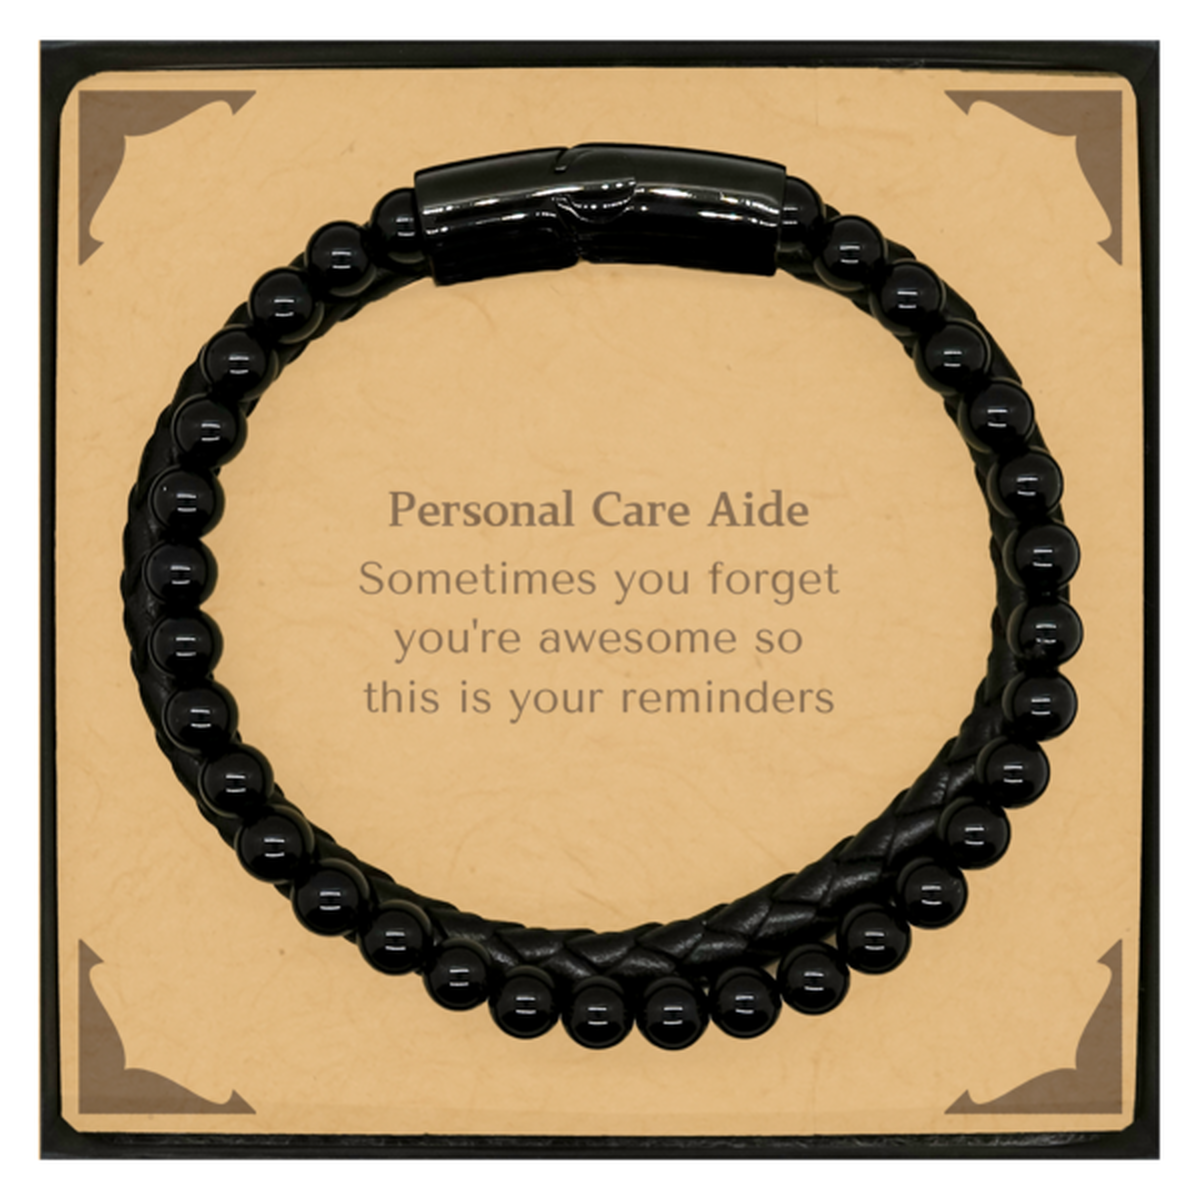 Sentimental Personal Care Aide Stone Leather Bracelets, Personal Care Aide Sometimes you forget you're awesome so this is your reminders, Graduation Christmas Birthday Gifts for Personal Care Aide, Men, Women, Coworkers